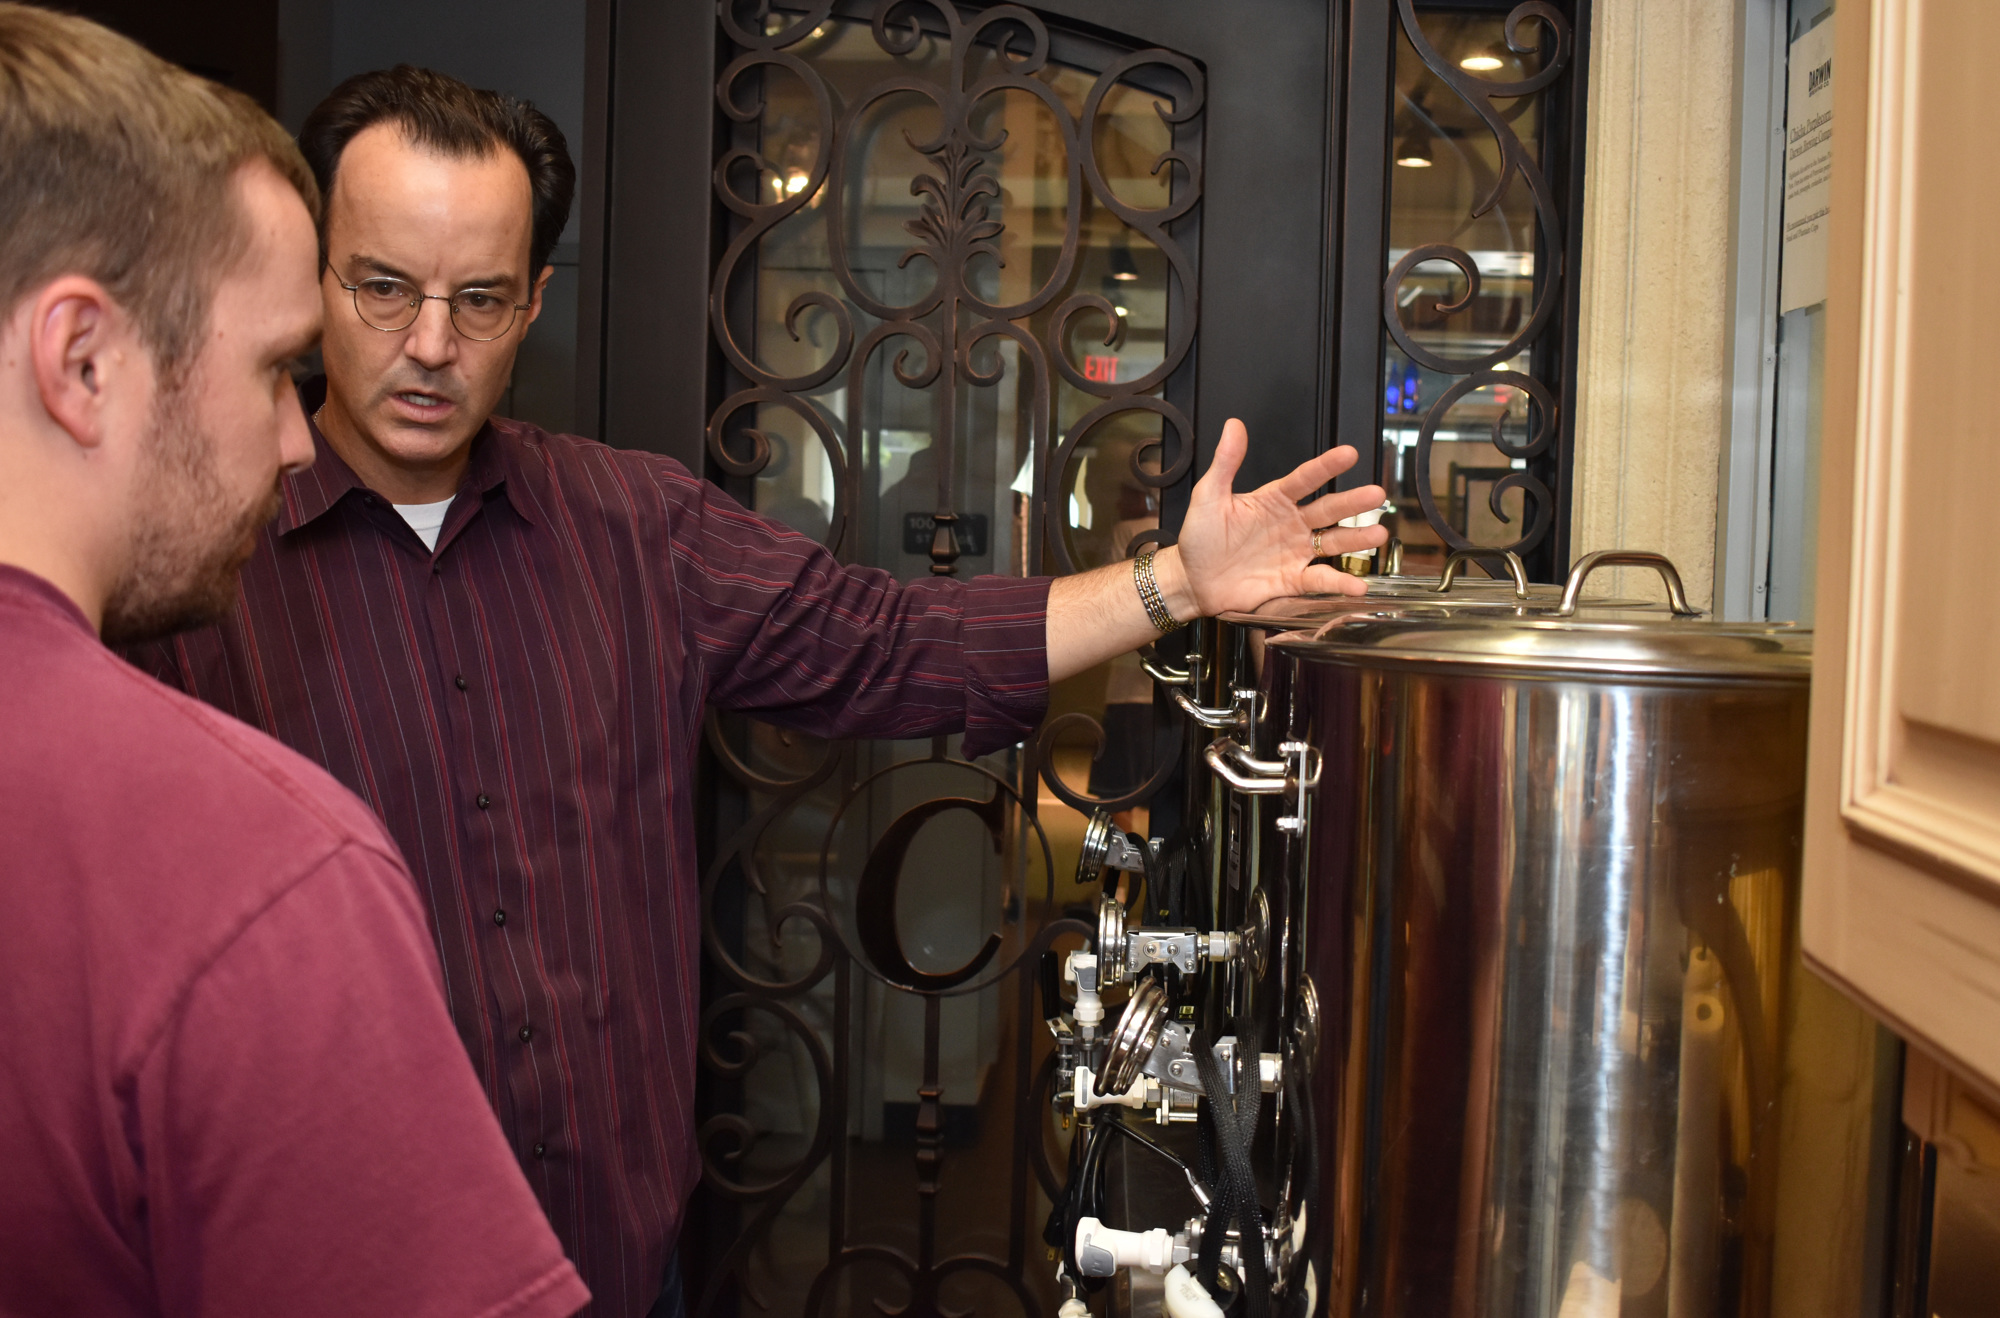 Instructor Joe Askren explains what the in-house Blichmann BoilerMaker does in the process of home brewing at the USFSM Culinary Innovation Lab. Photo by Niki Kottmann